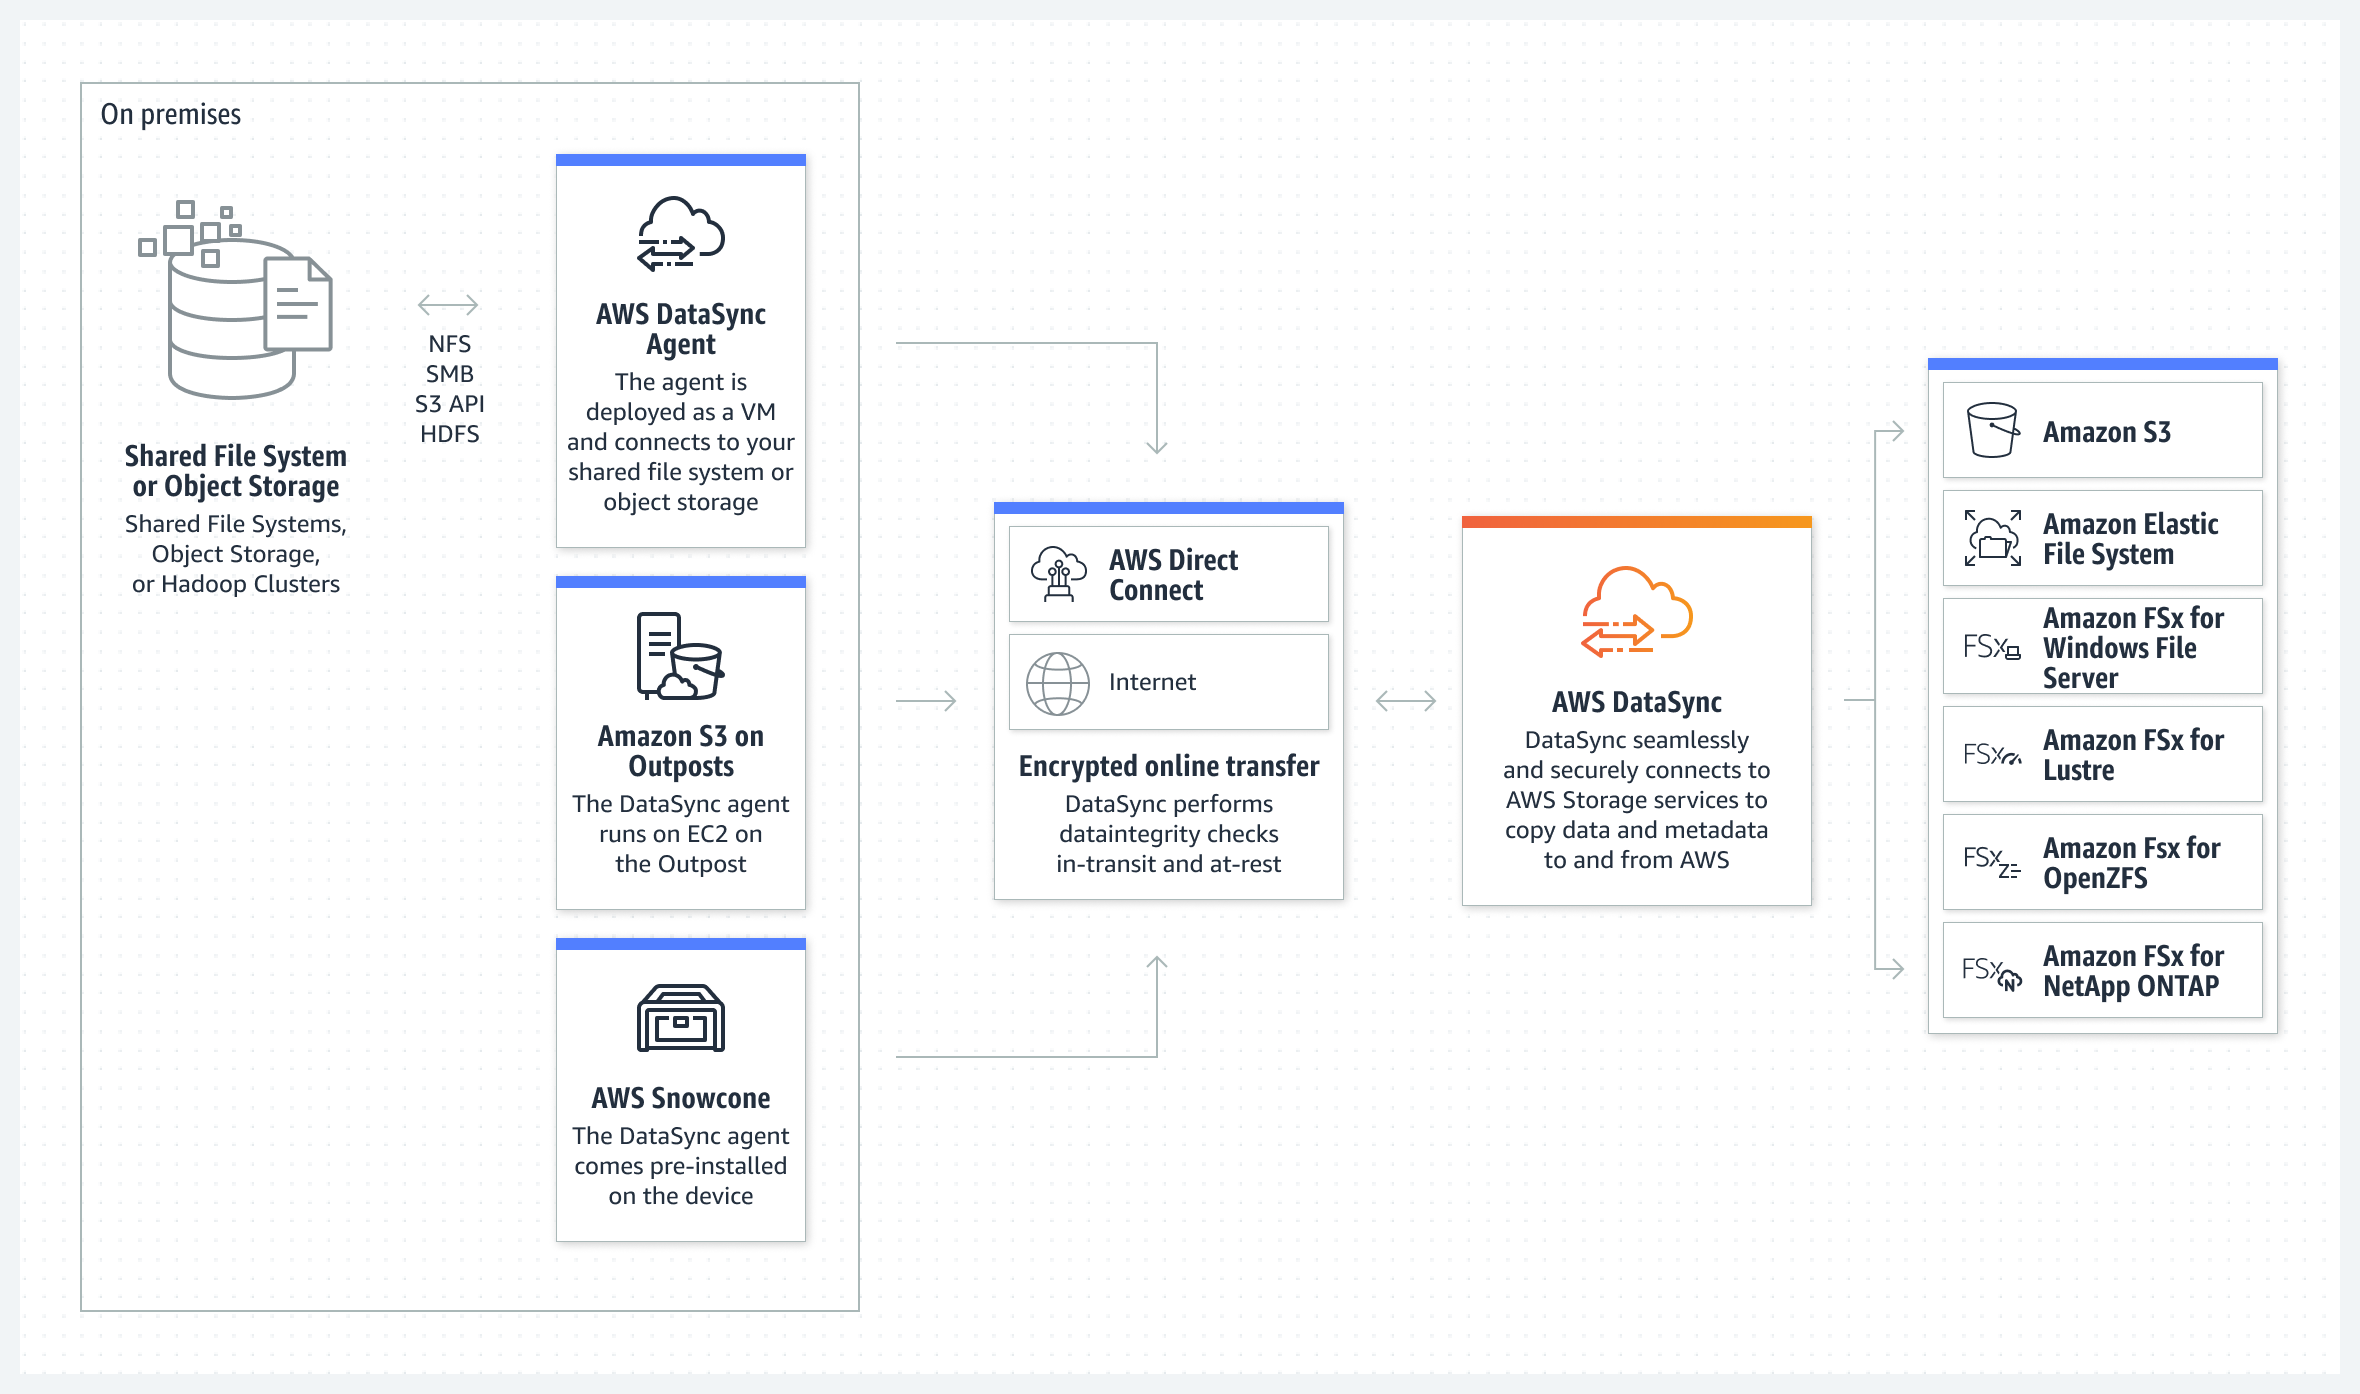 How transferring data between on premises and AWS works